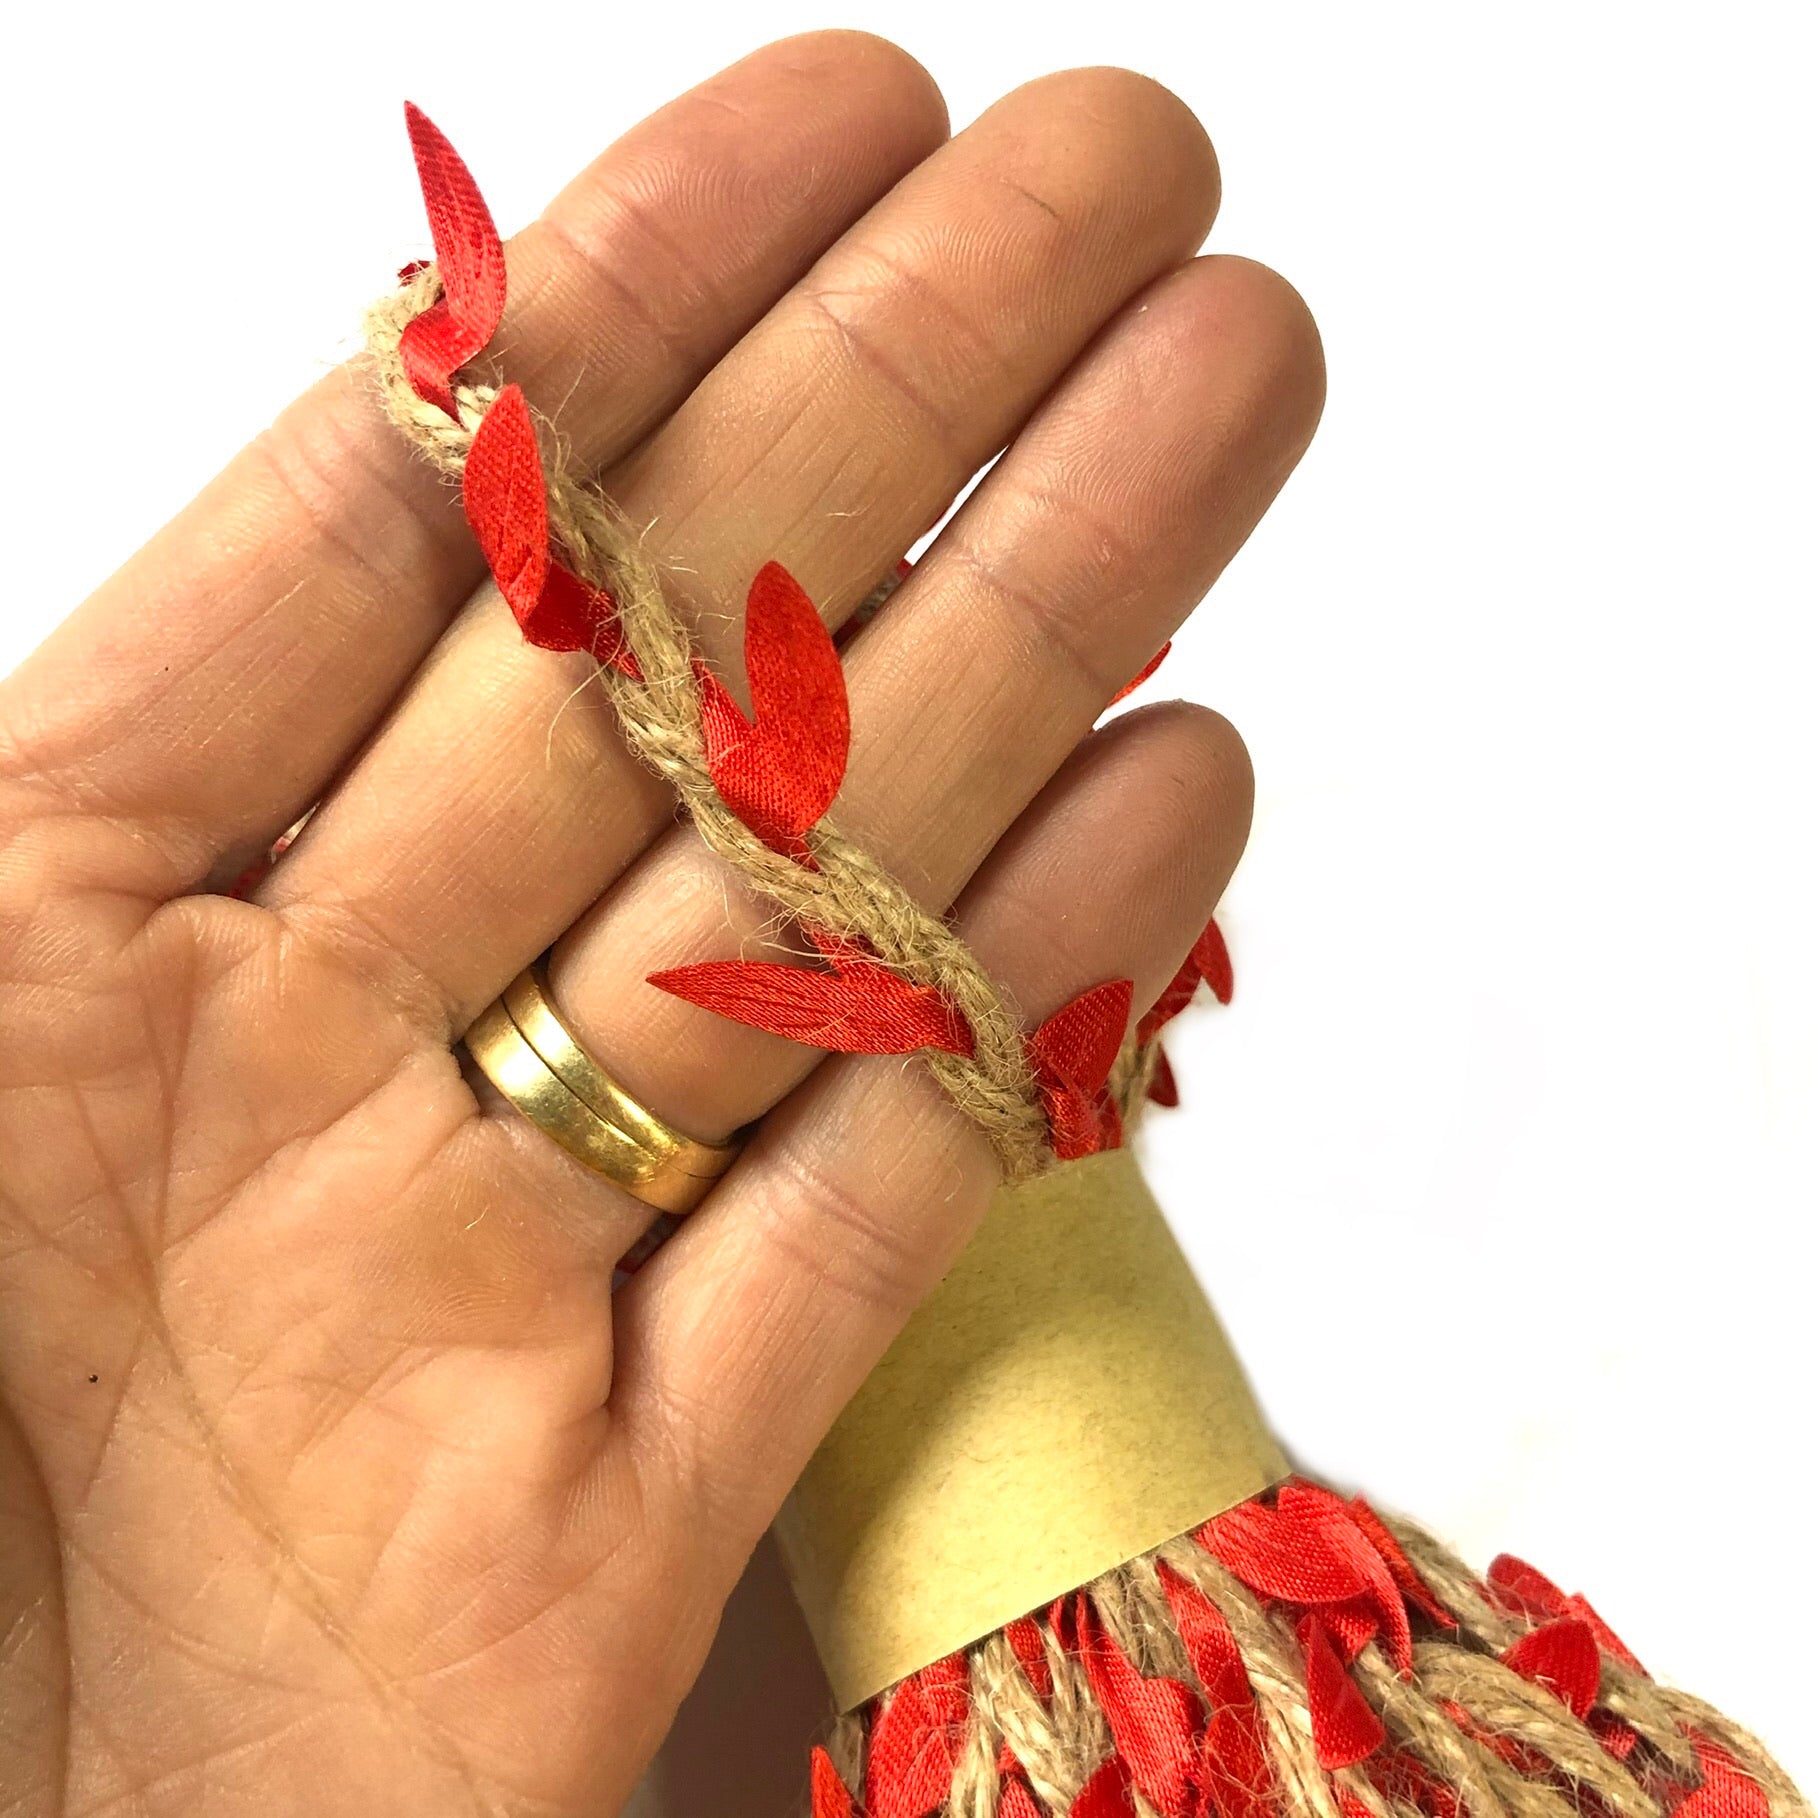 Braided Jute Cord with Vine Leaf per 10 mtrs - Natural with Red Leaf